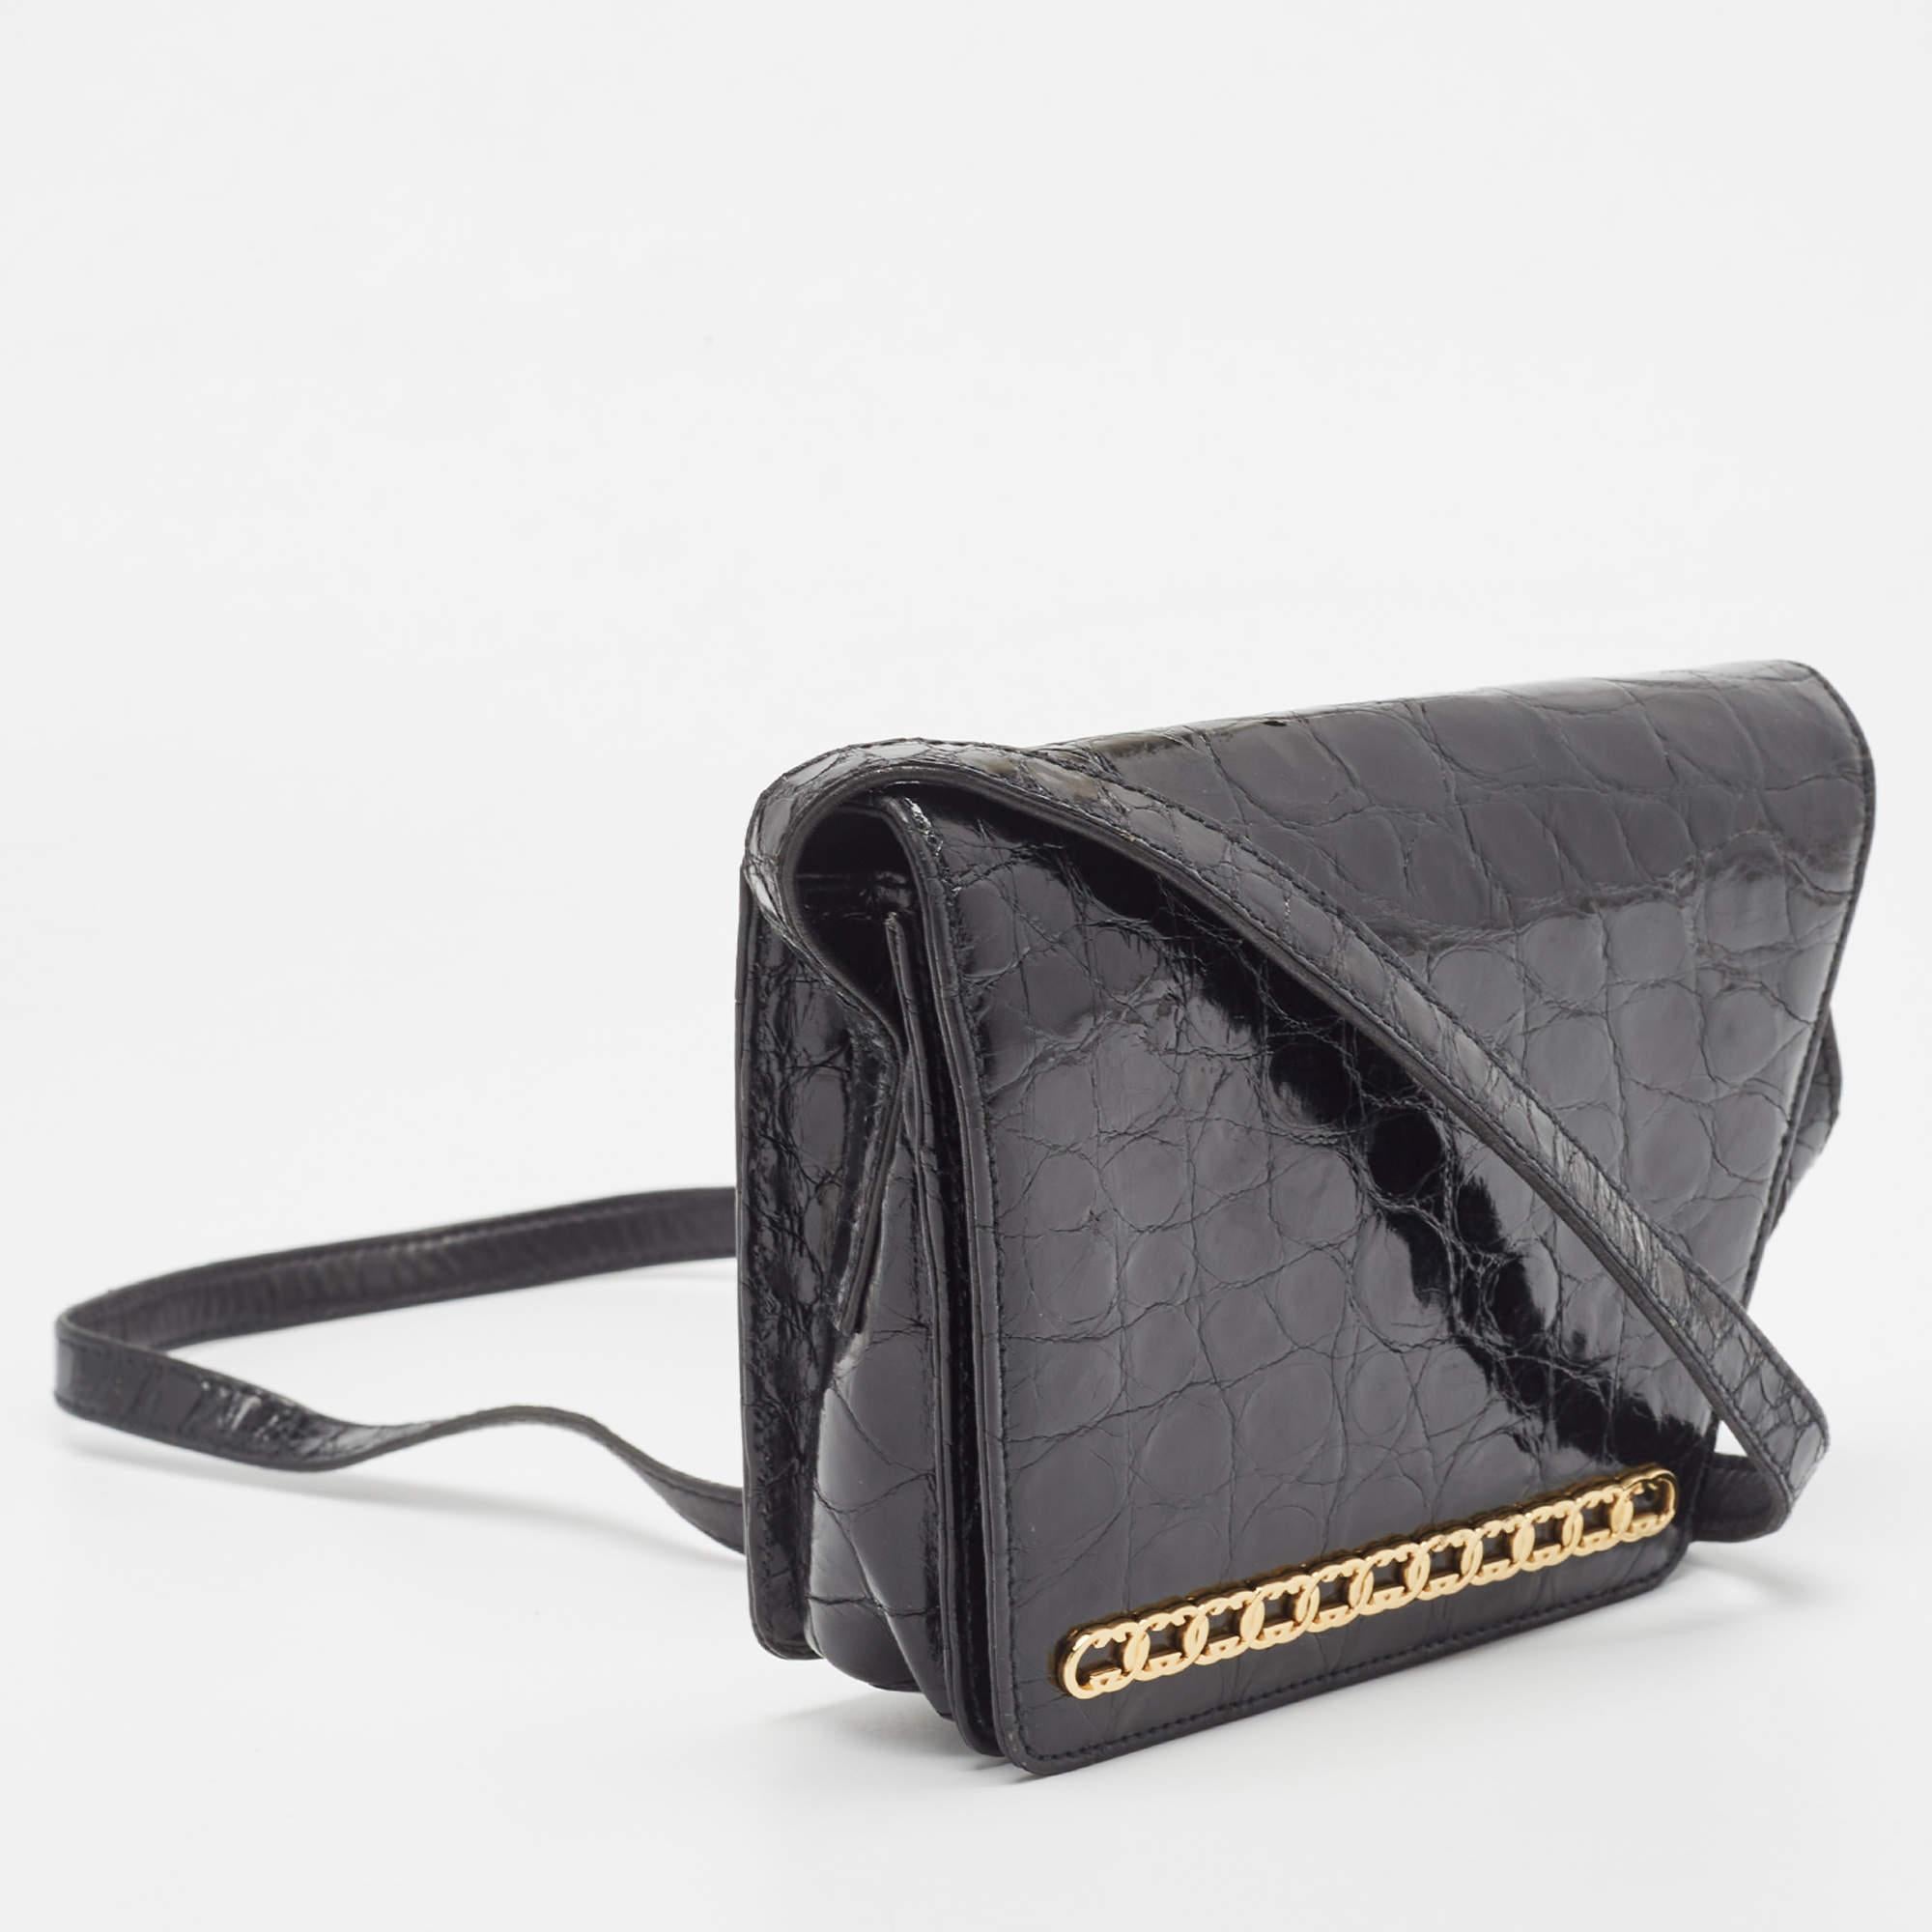 Perfect for conveniently housing your essentials in one place, this Gucci crocodile leather bag is a worthy investment. It has notable details and offers a look of luxury.

